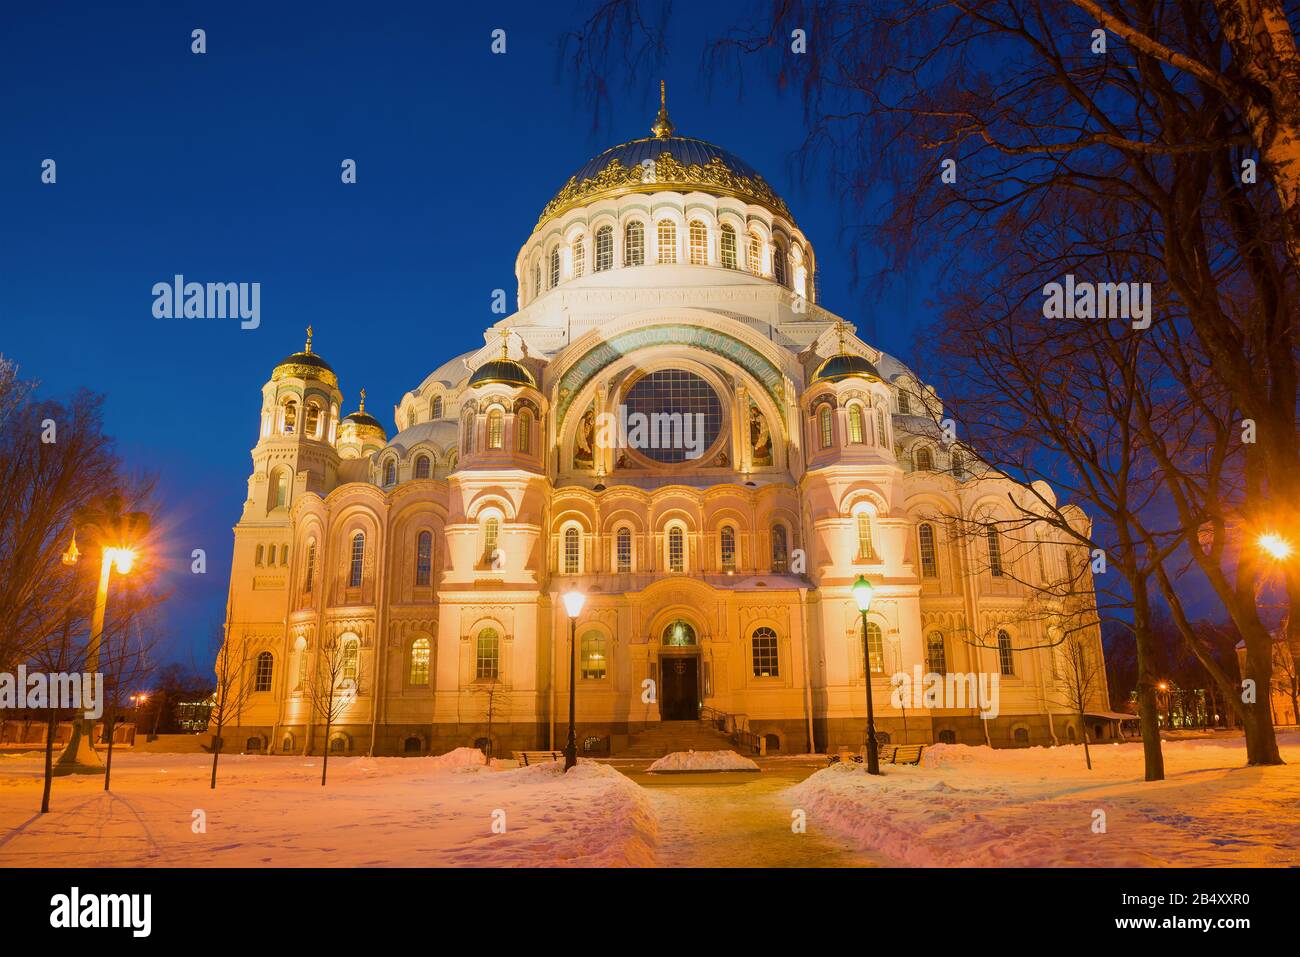 St. Nicholas Naval Cathedral in warm night lighting close-up. Kronstadt, Russia Stock Photo